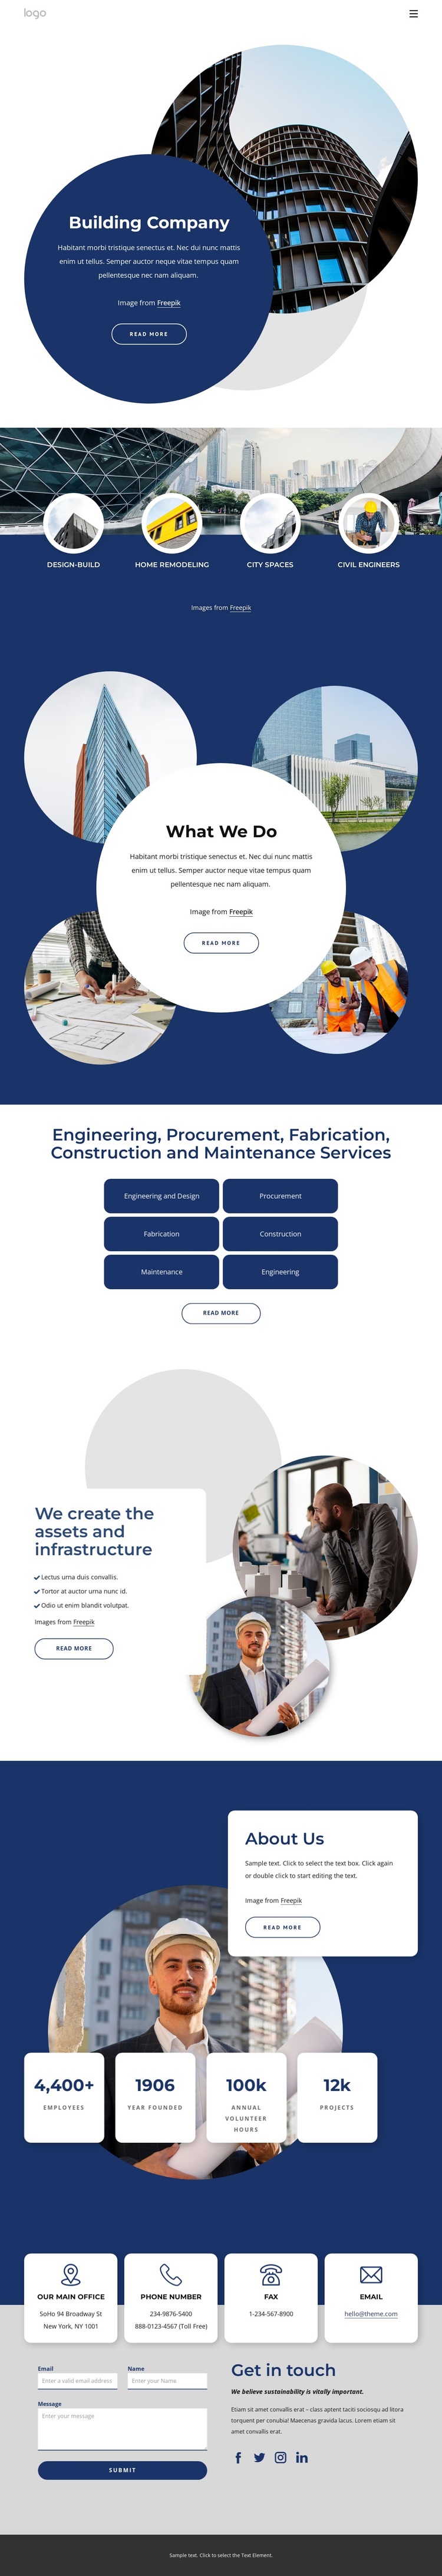 International construction services company Template